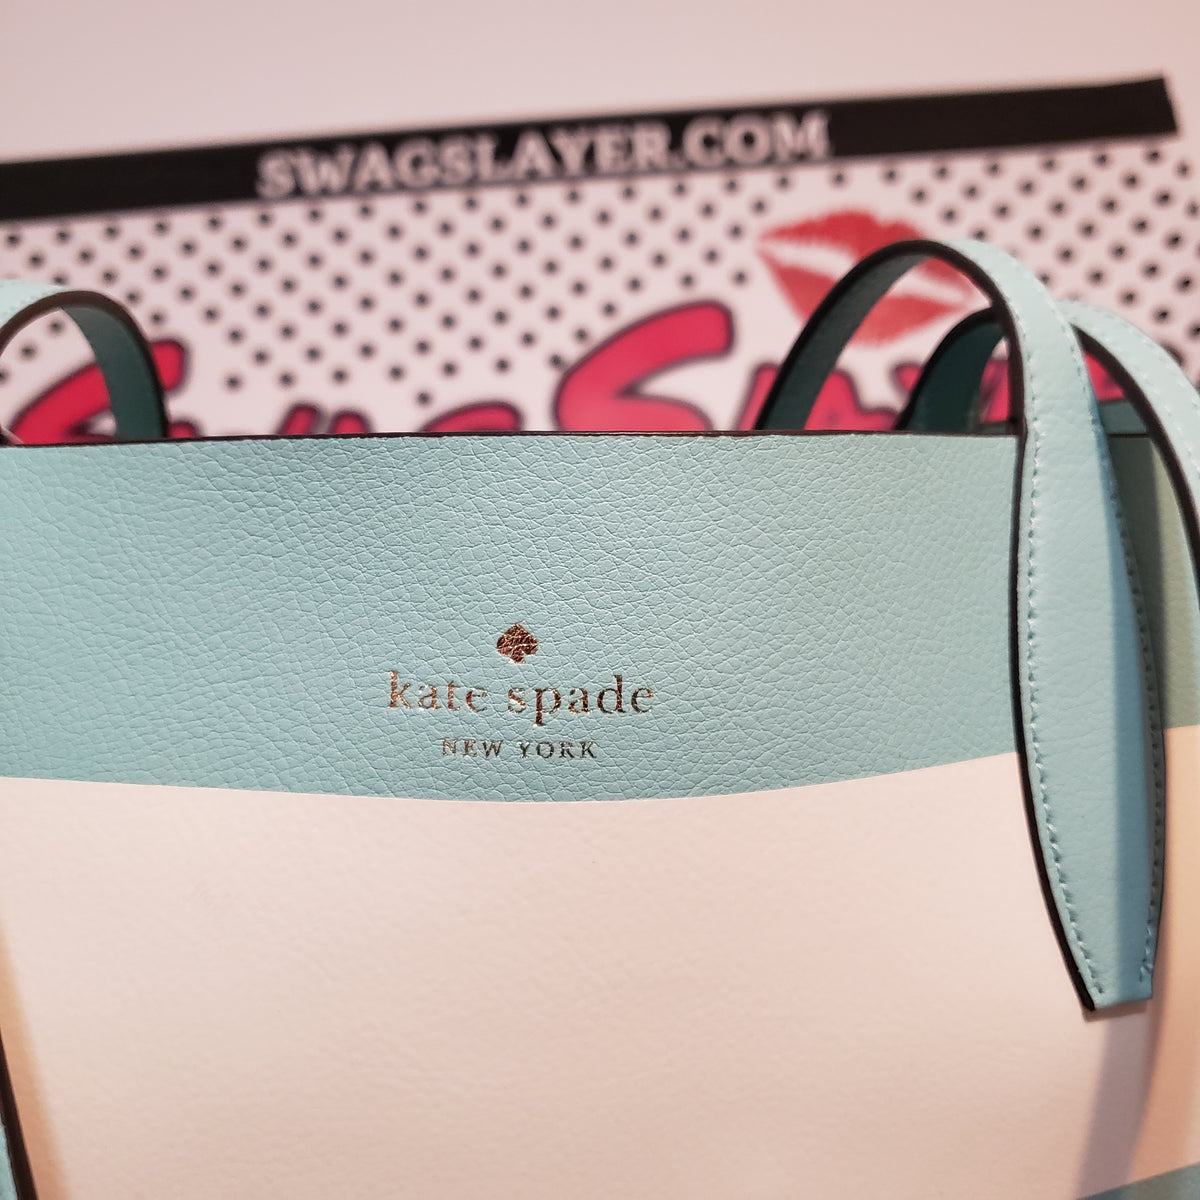 New Kate Spade Float On Tote Bag– Swagslayer